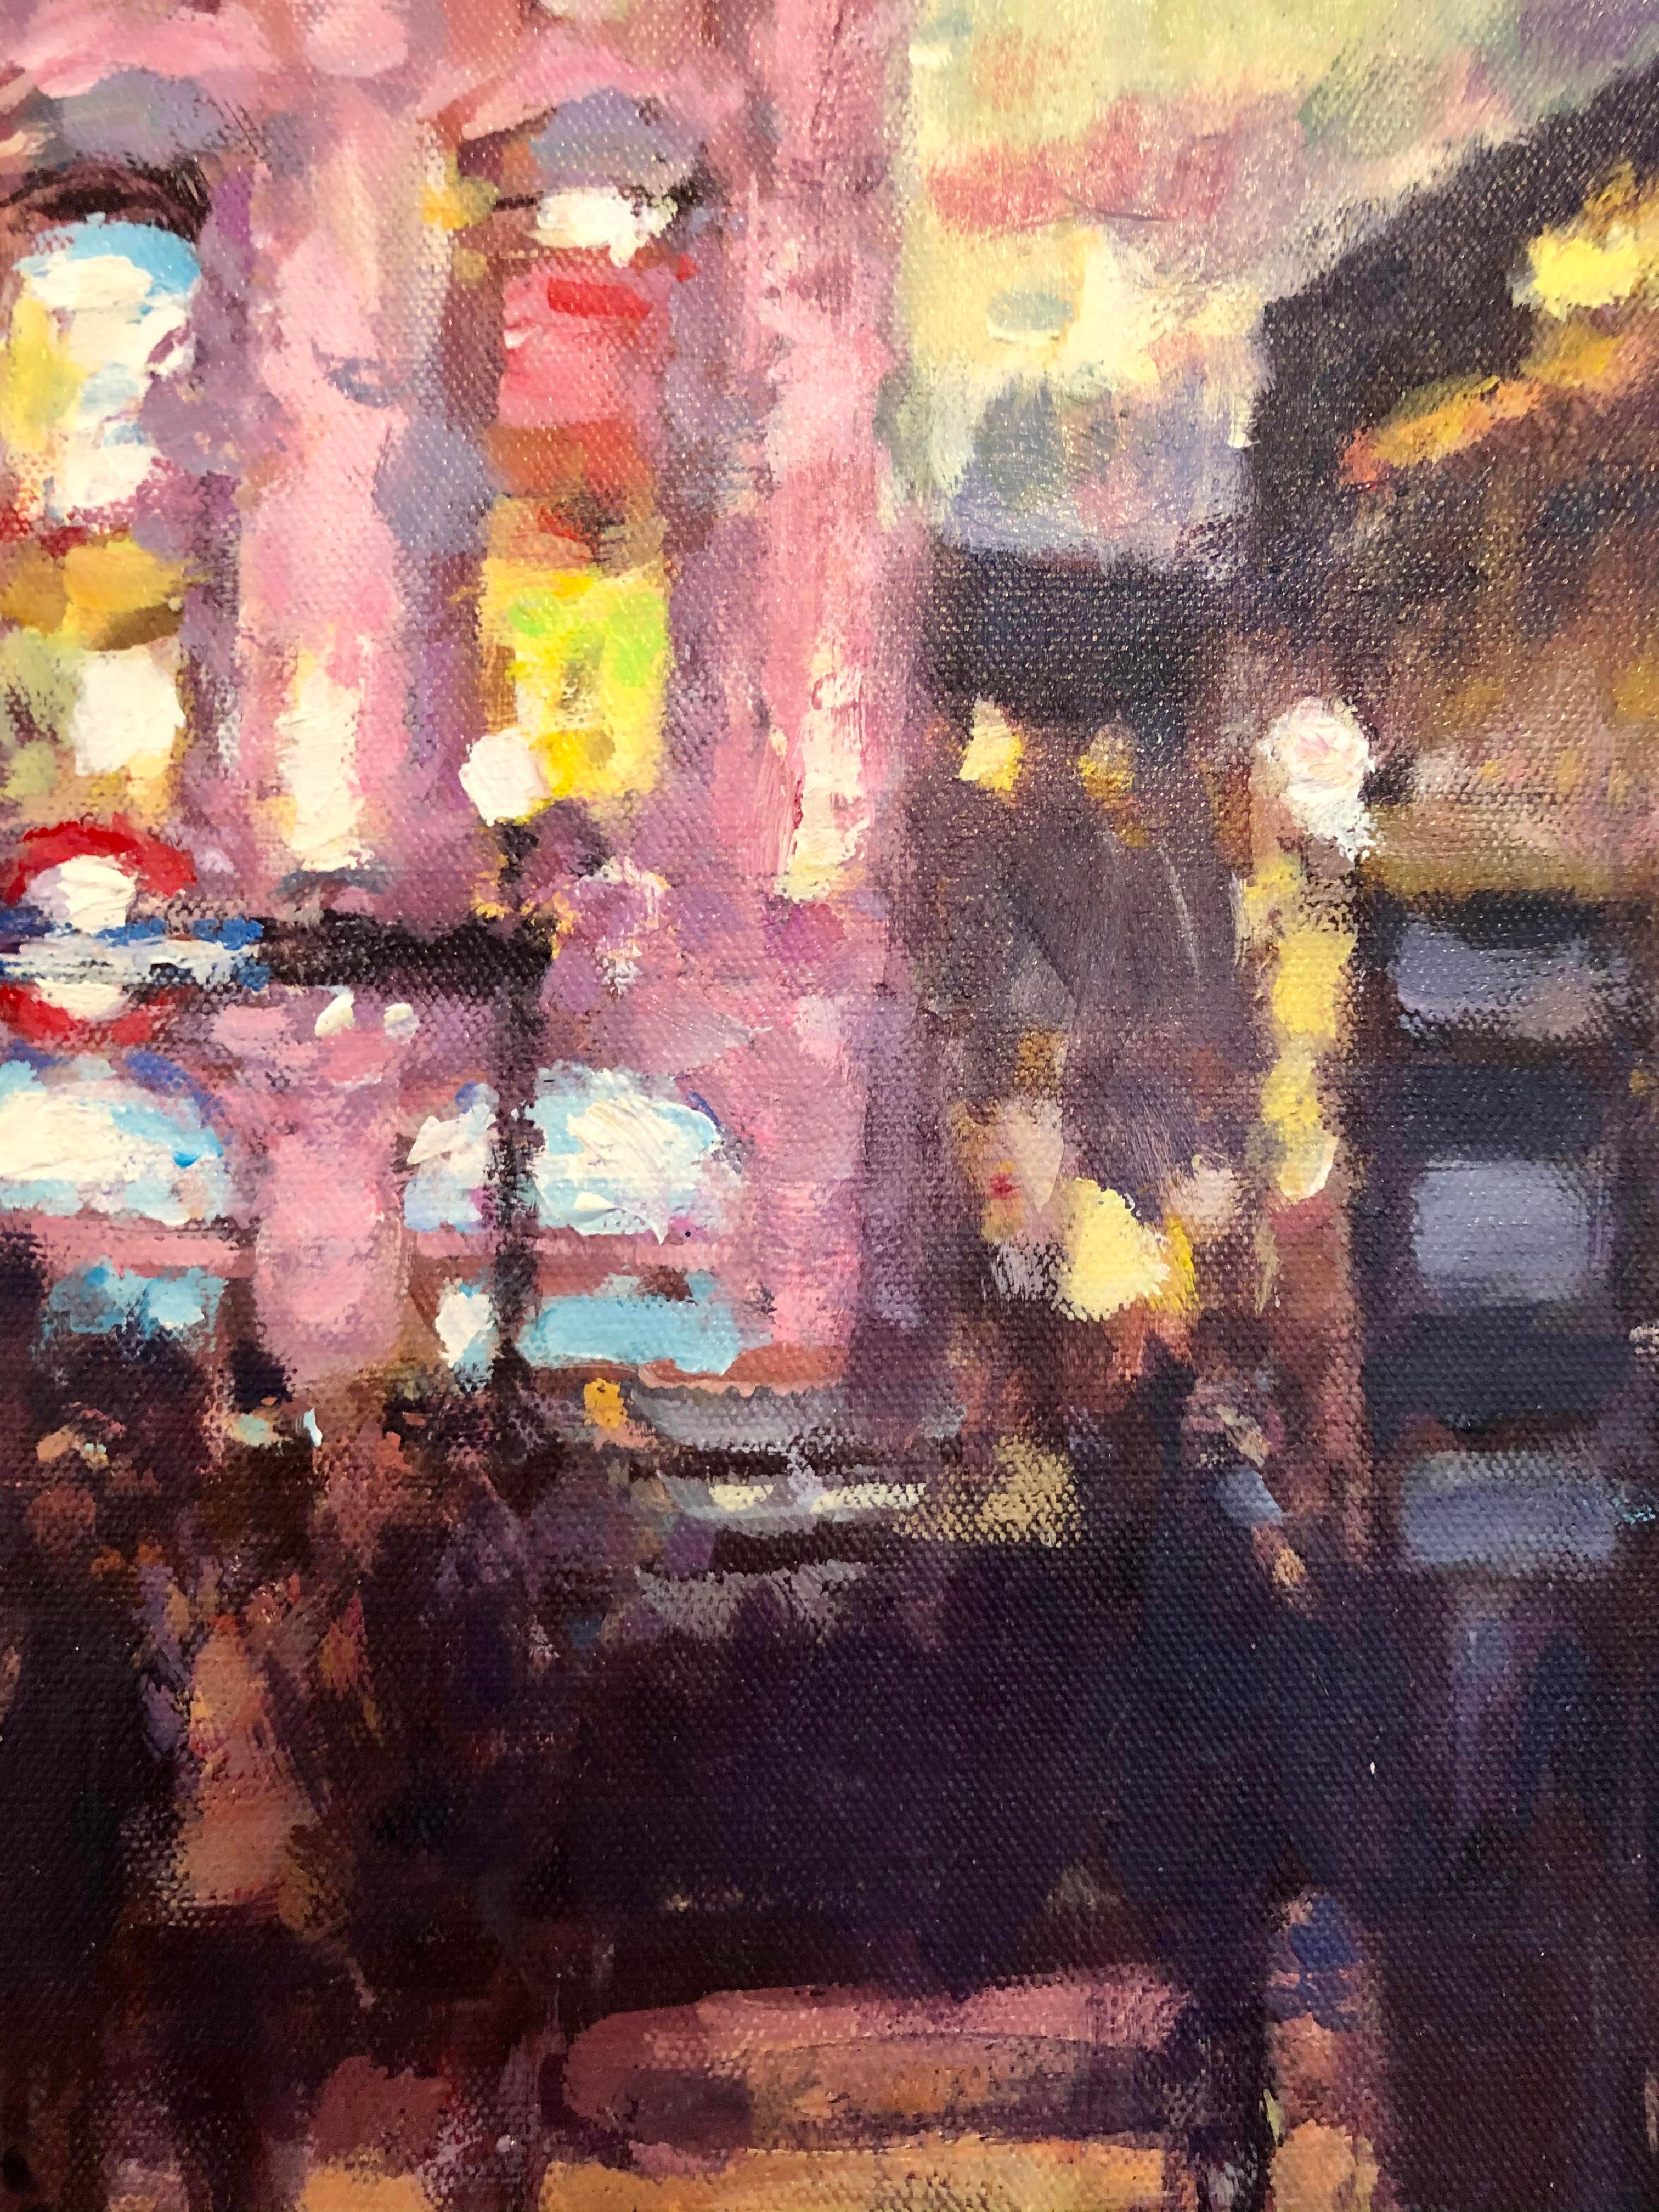 Nightfall, Piccadilly Circus-original impressionism London cityscape painting - Impressionist Painting by David Farren